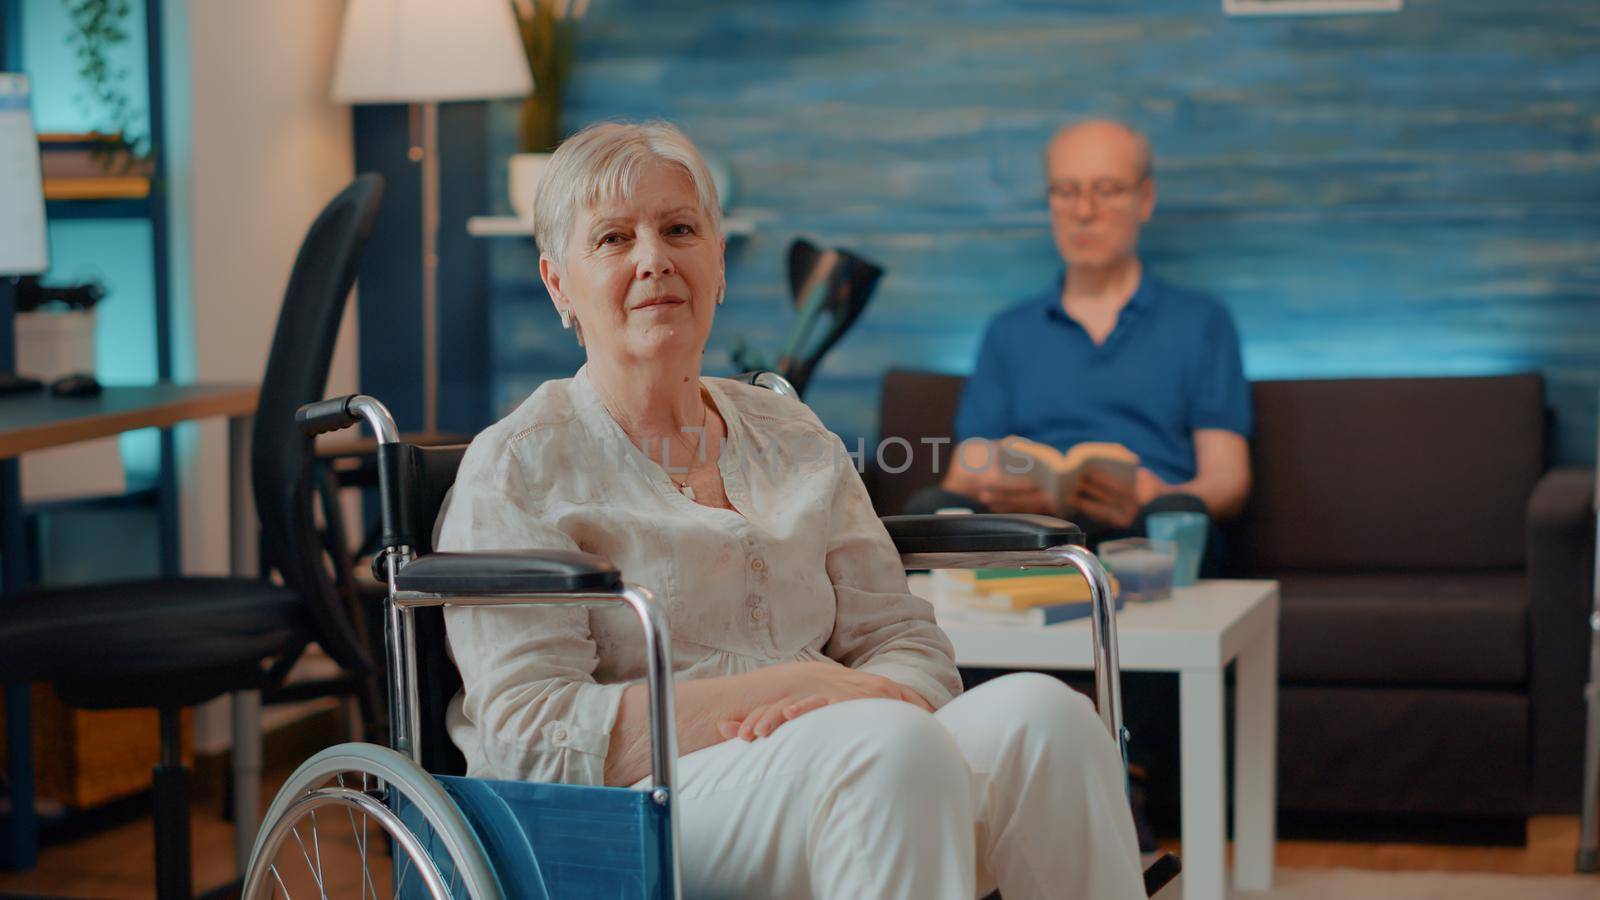 Portrait of older person with chronic disability looking at camera in living room. Senior woman in wheelchair suffering from mobility problem, using object to give support with transportation.